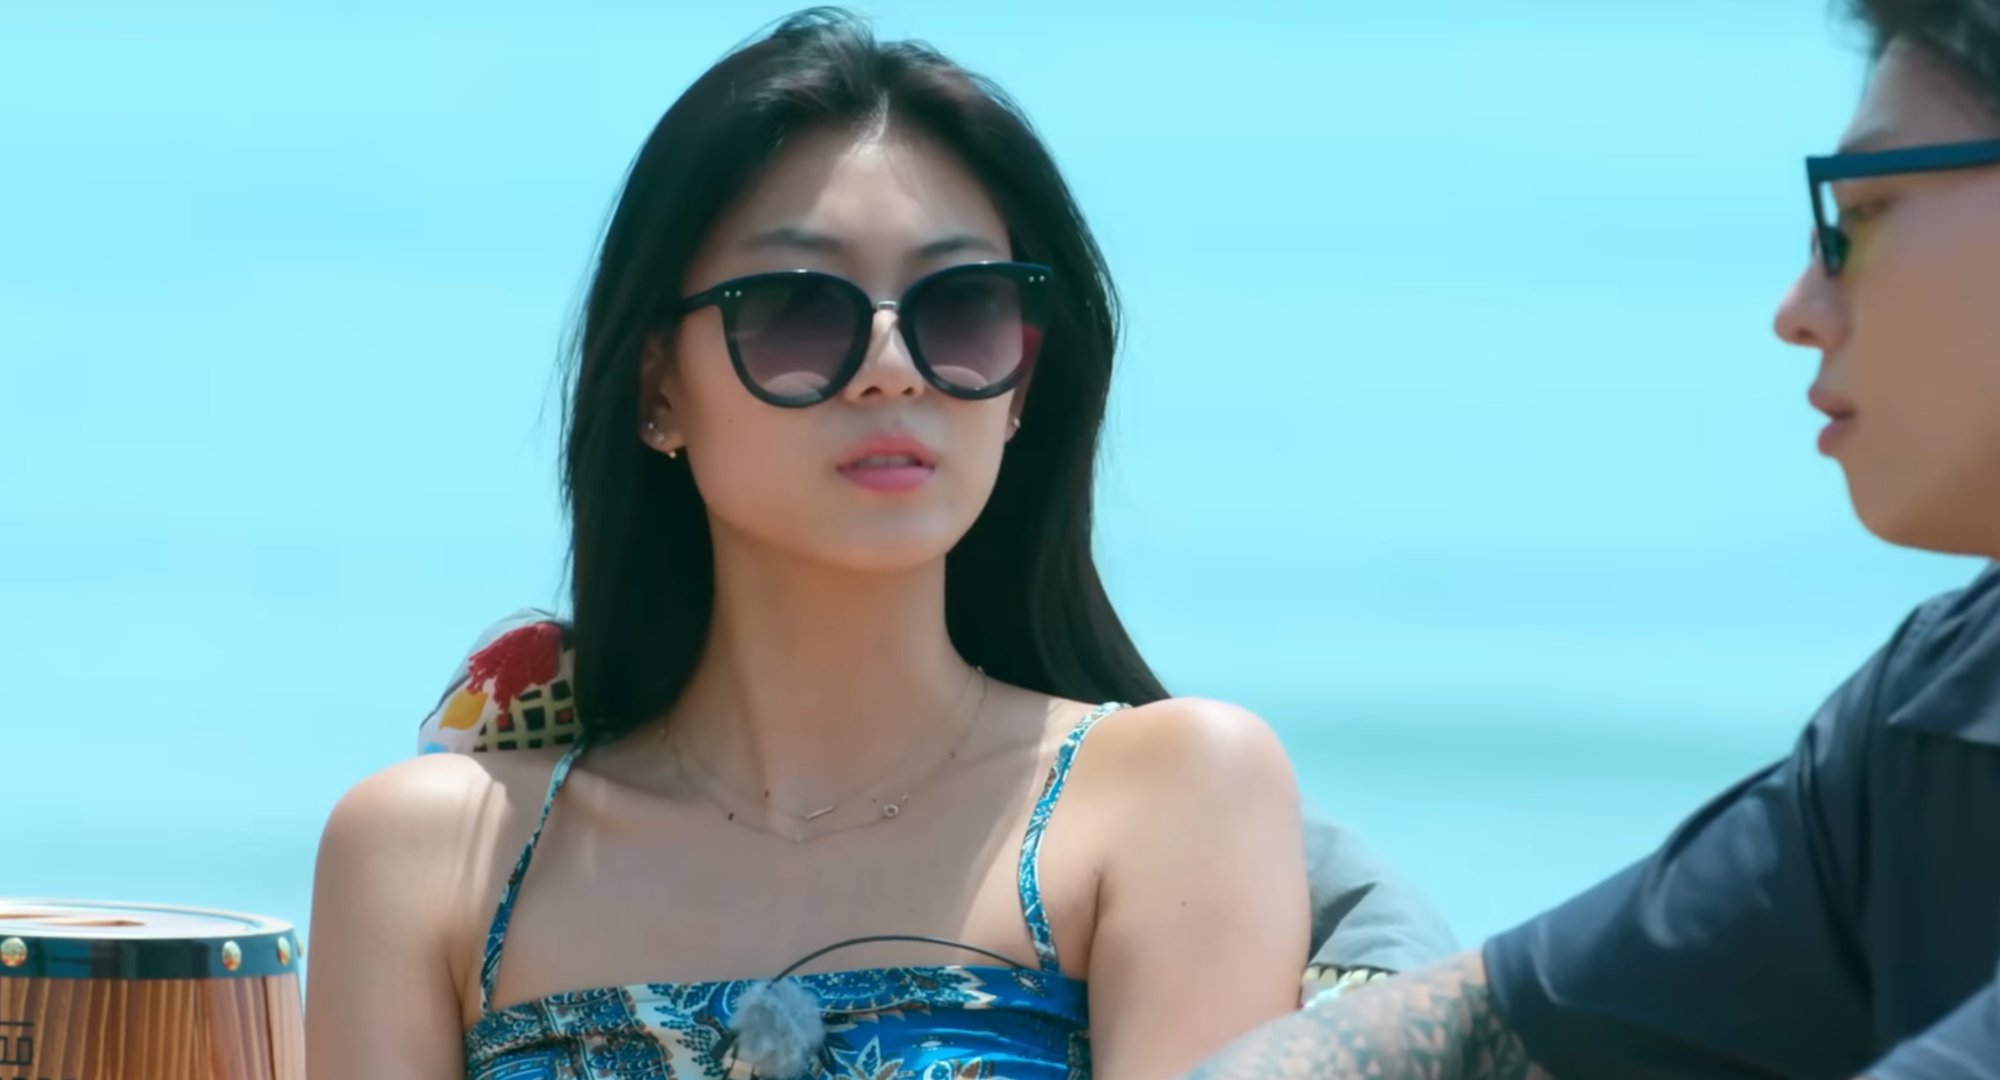 Nadine and Jin-young during beach date on 'Single's Inferno' Season 2.